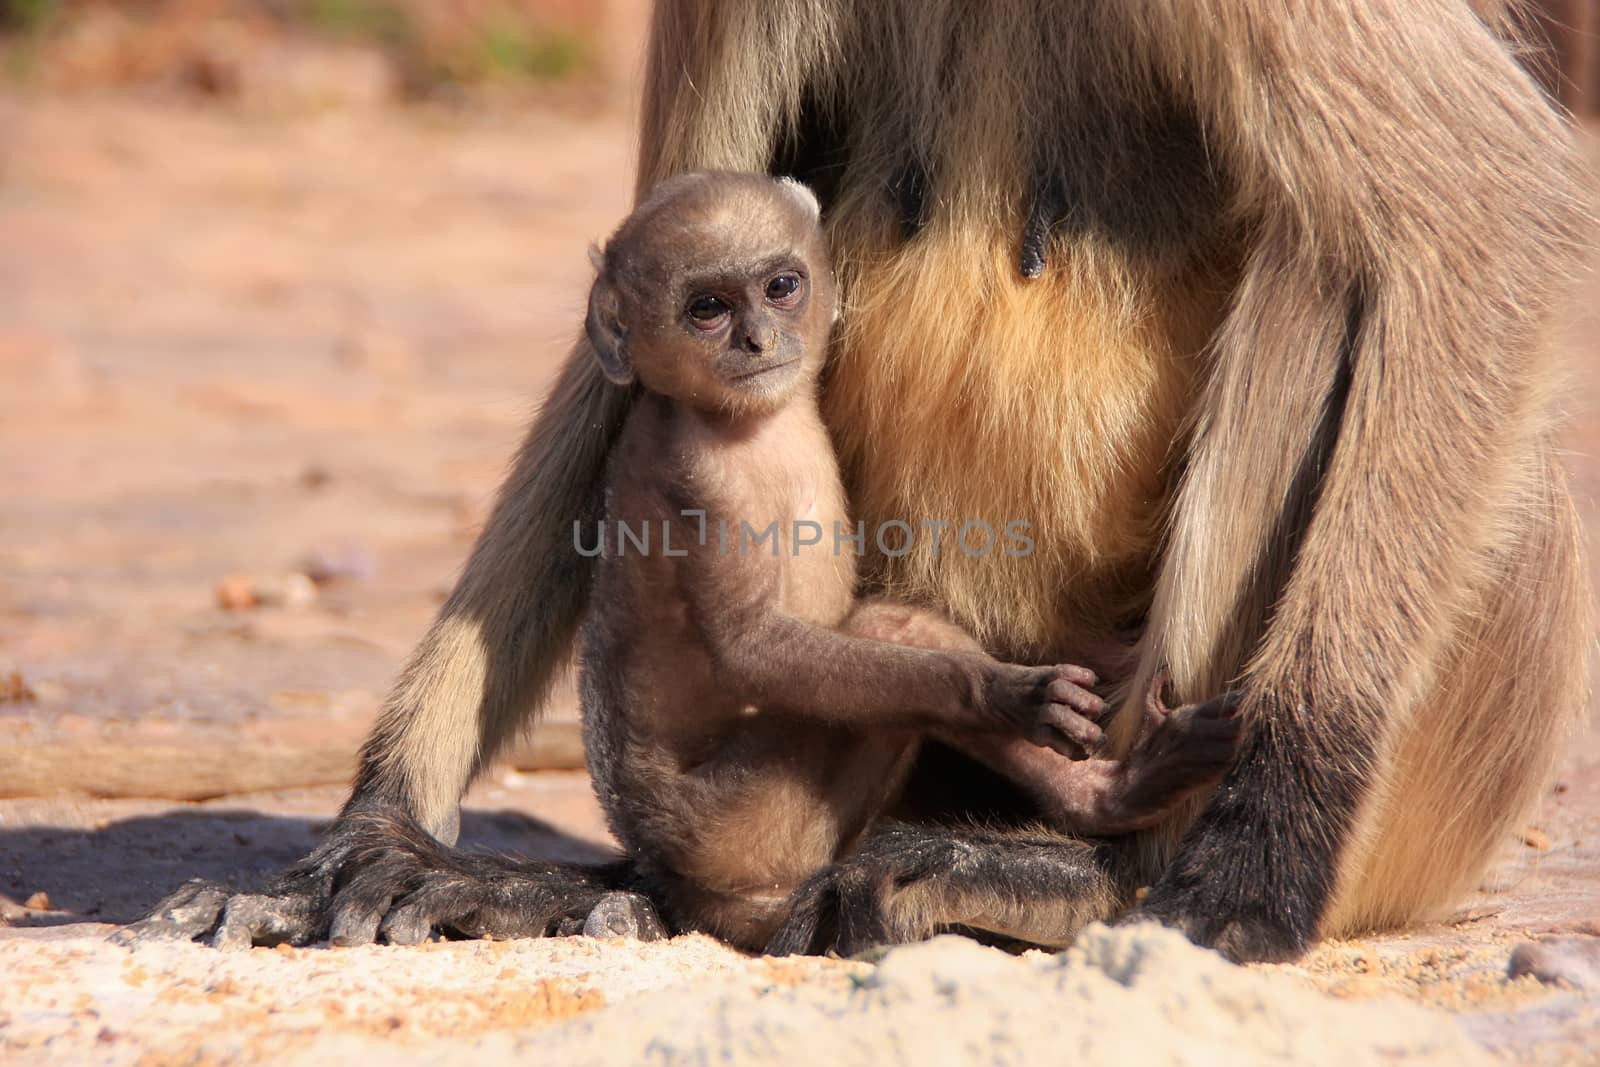 Baby Gray langur (Semnopithecus dussumieri) playing near mother, by donya_nedomam